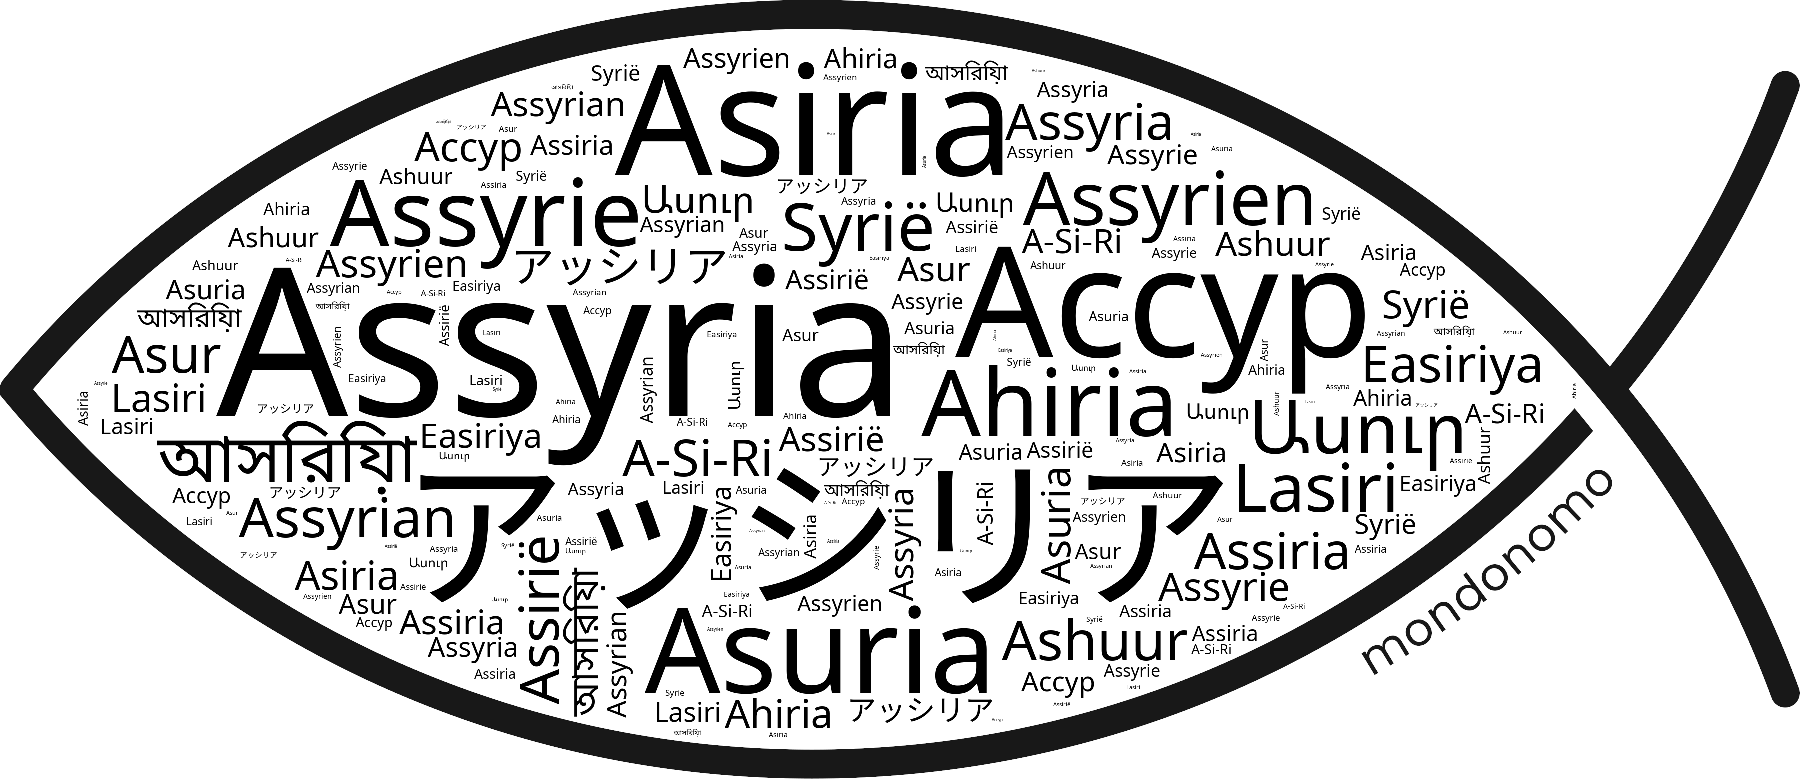 Name Assyria in the world's Bibles